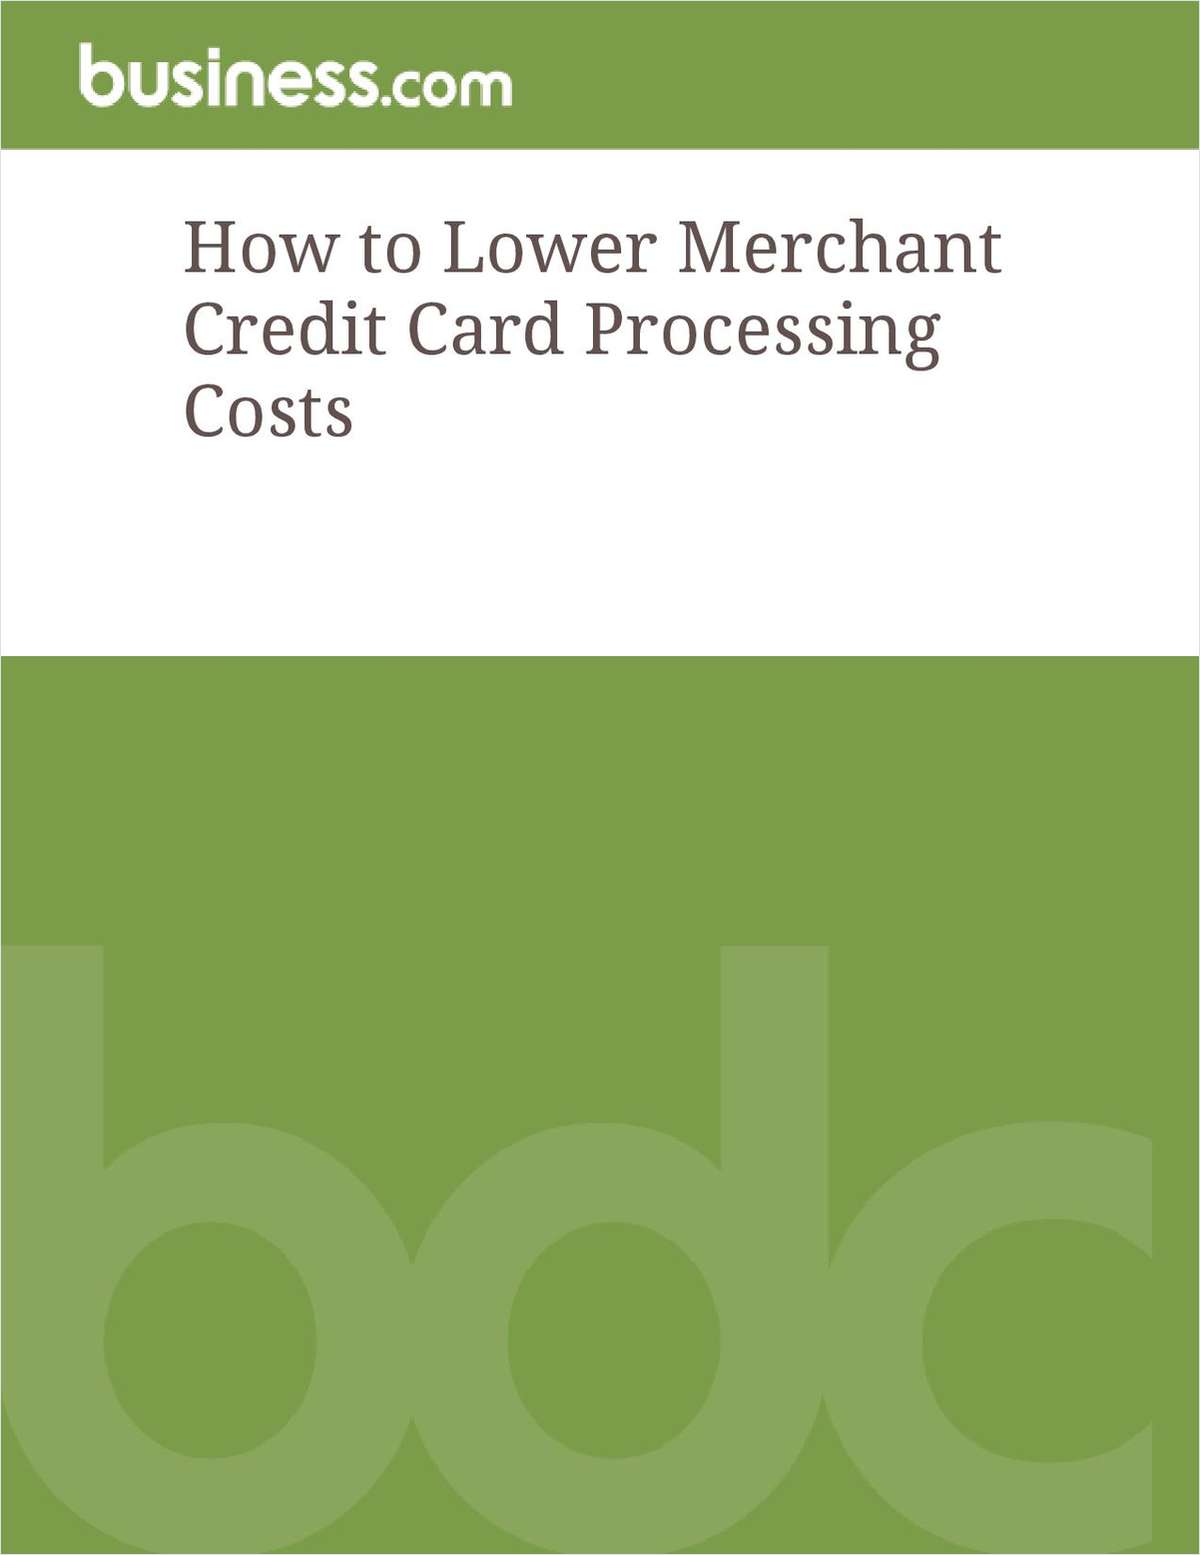 How to Lower Merchant Credit Card Processing Costs